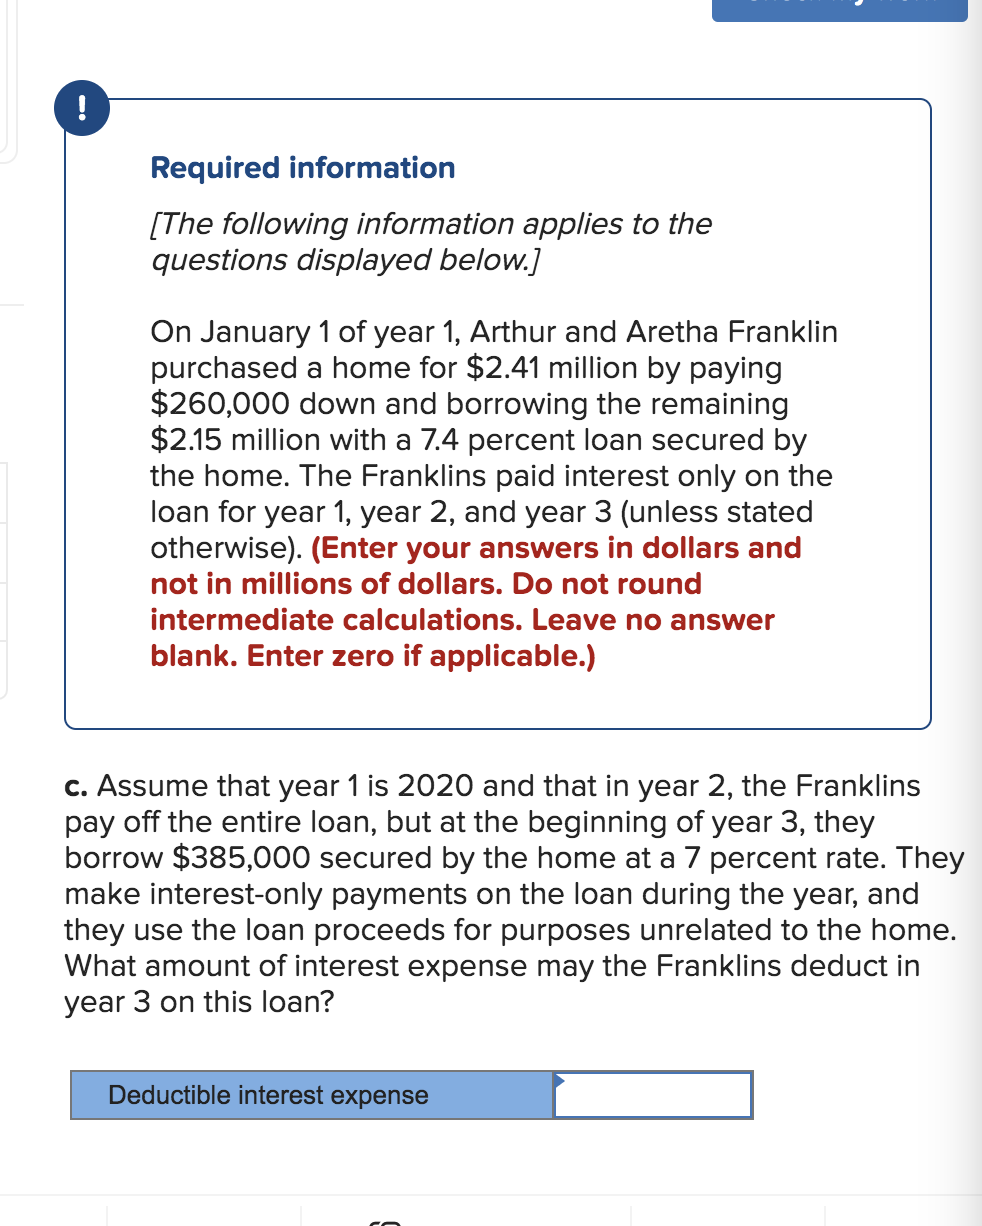 !
Required information
[The following information applies to the
questions displayed below.]
On January 1 of year 1, Arthur and Aretha Franklin
purchased a home for $2.41 million by paying
$260,000 down and borrowing the remaining
$2.15 million with a 7.4 percent loan secured by
the home. The Franklins paid interest only on the
loan for year 1, year 2, and year 3 (unless stated
otherwise). (Enter your answers in dollars and
not in millions of dollars. Do not round
intermediate calculations. Leave no answer
blank. Enter zero if applicable.)
c. Assume that year 1 is 2020 and that in year 2, the Franklins
pay off the entire loan, but at the beginning of year 3, they
borrow $385,000 secured by the home at a 7 percent rate. They
make interest-only payments on the loan during the year, and
they use the loan proceeds for purposes unrelated to the home.
What amount of interest expense may the Franklins deduct in
year 3 on this loan?
Deductible interest expense